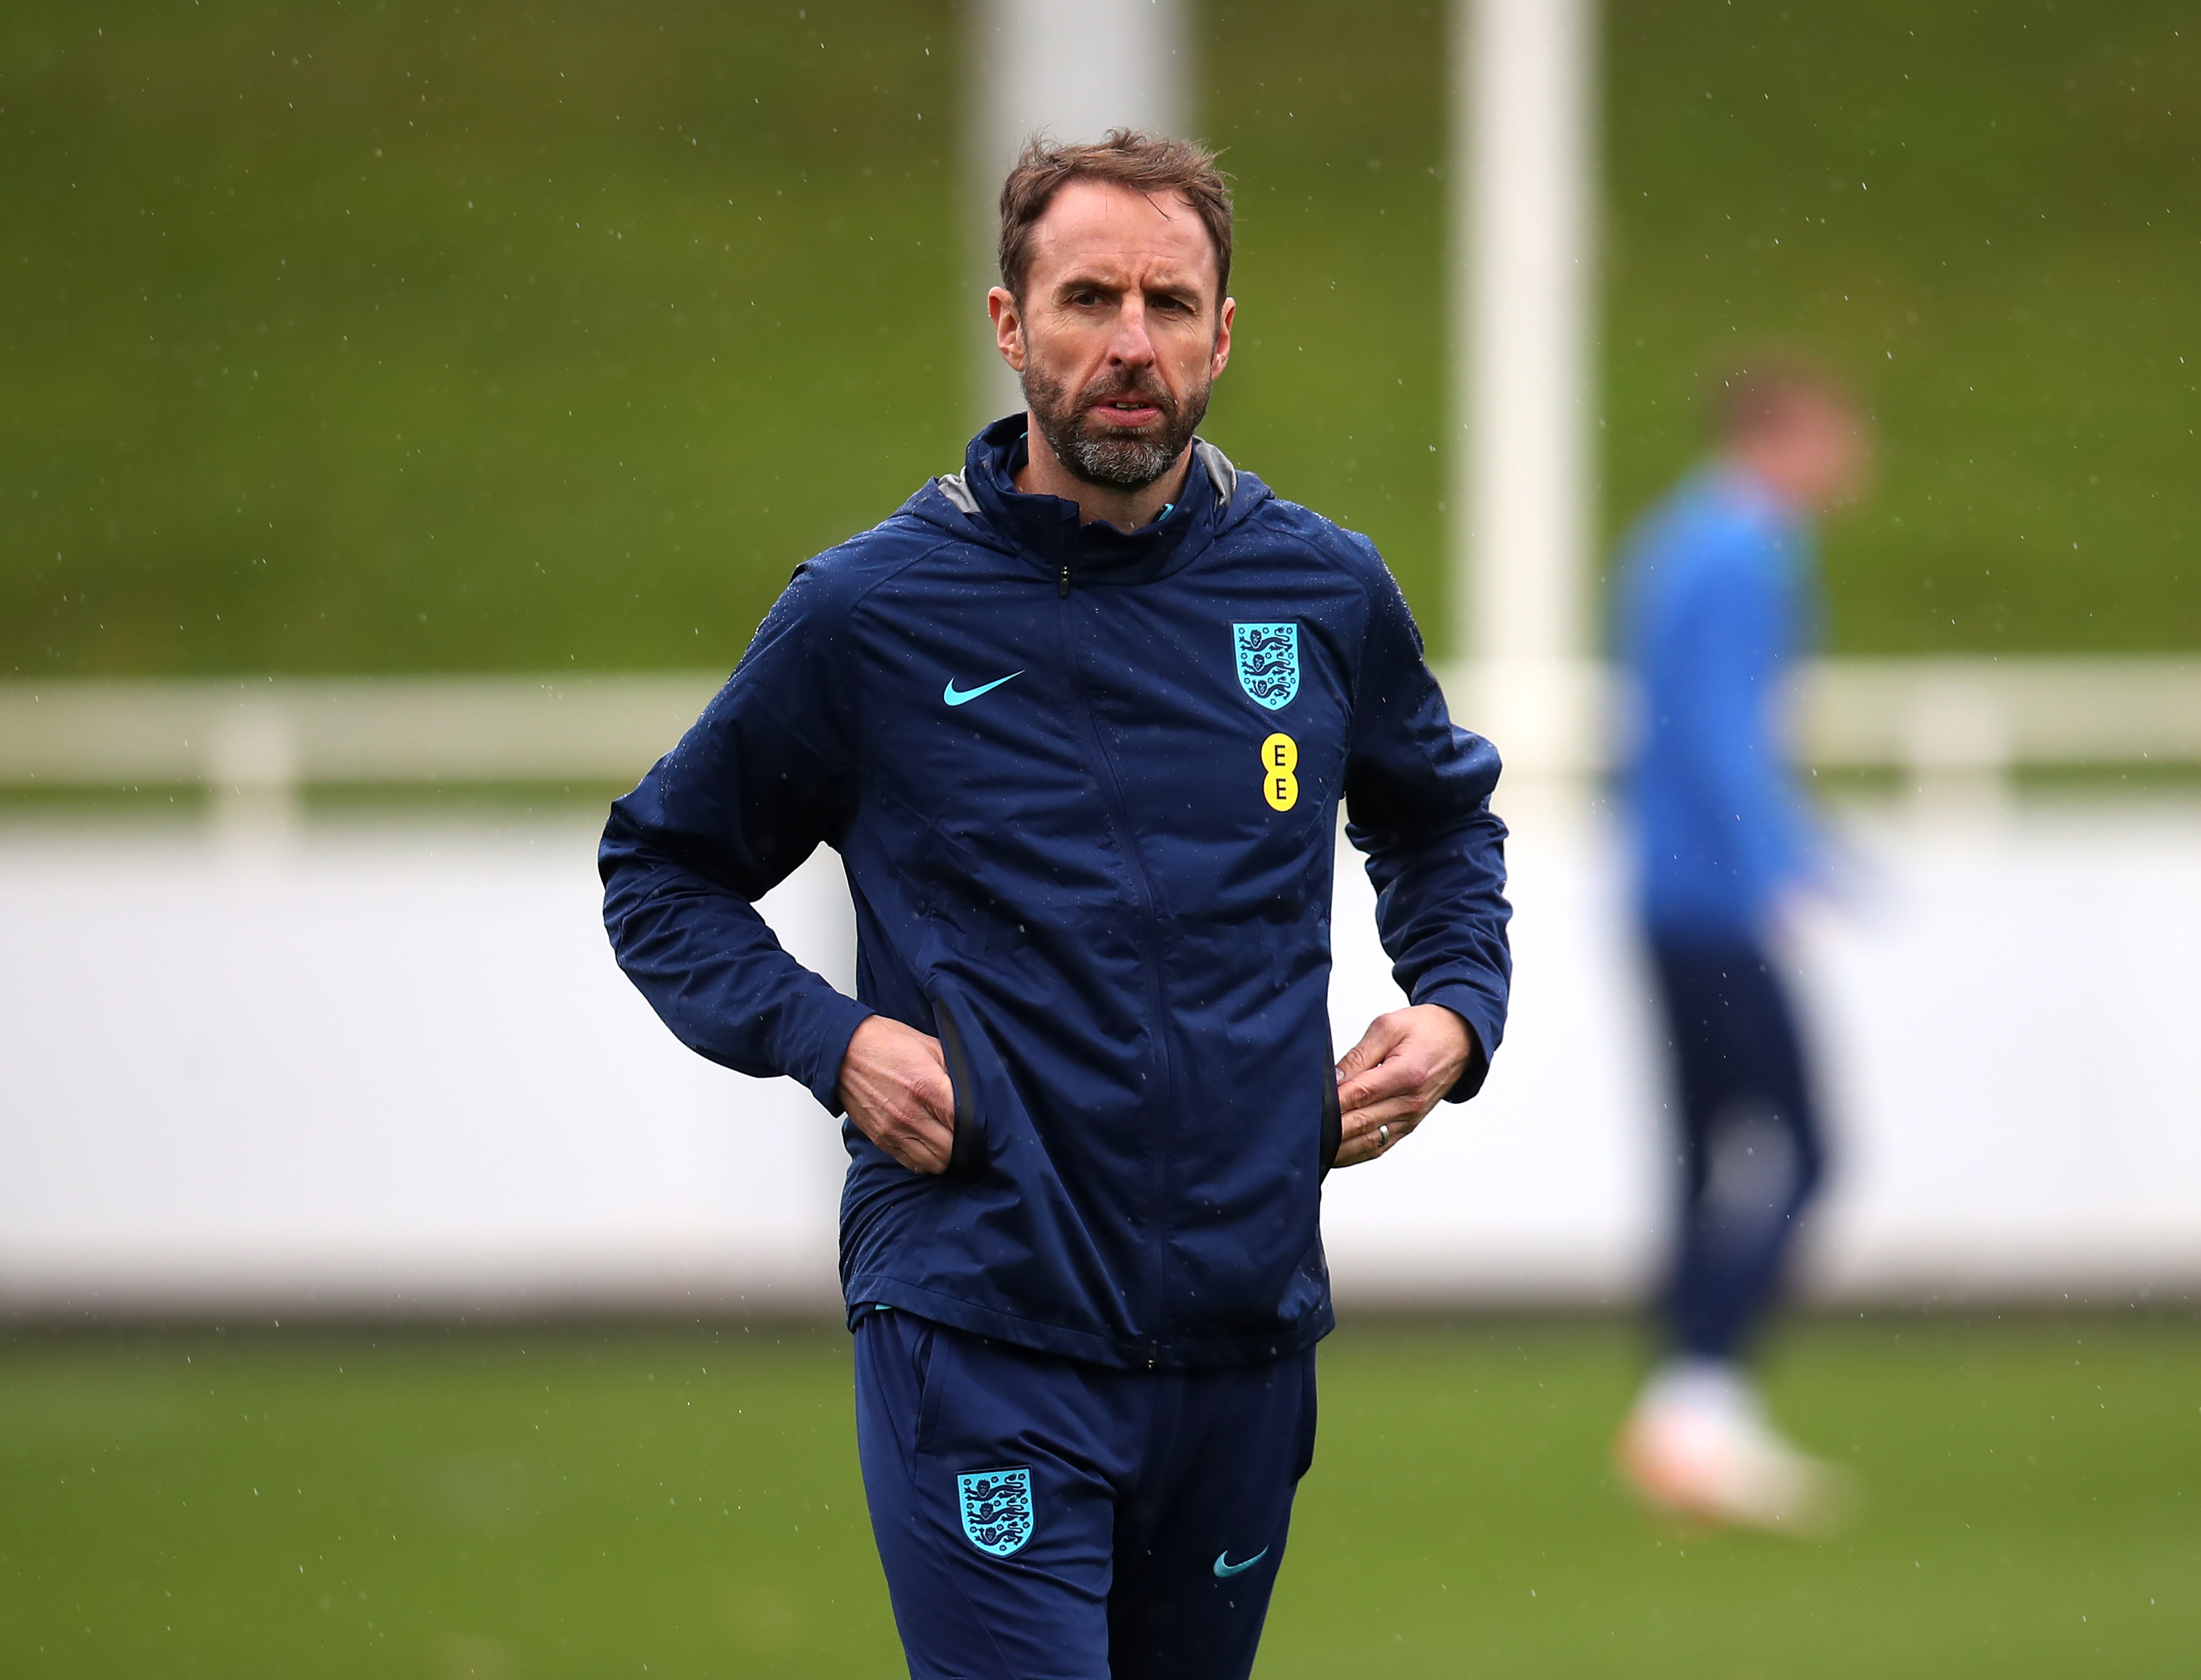 Gareth Southgate had led England to another major finals